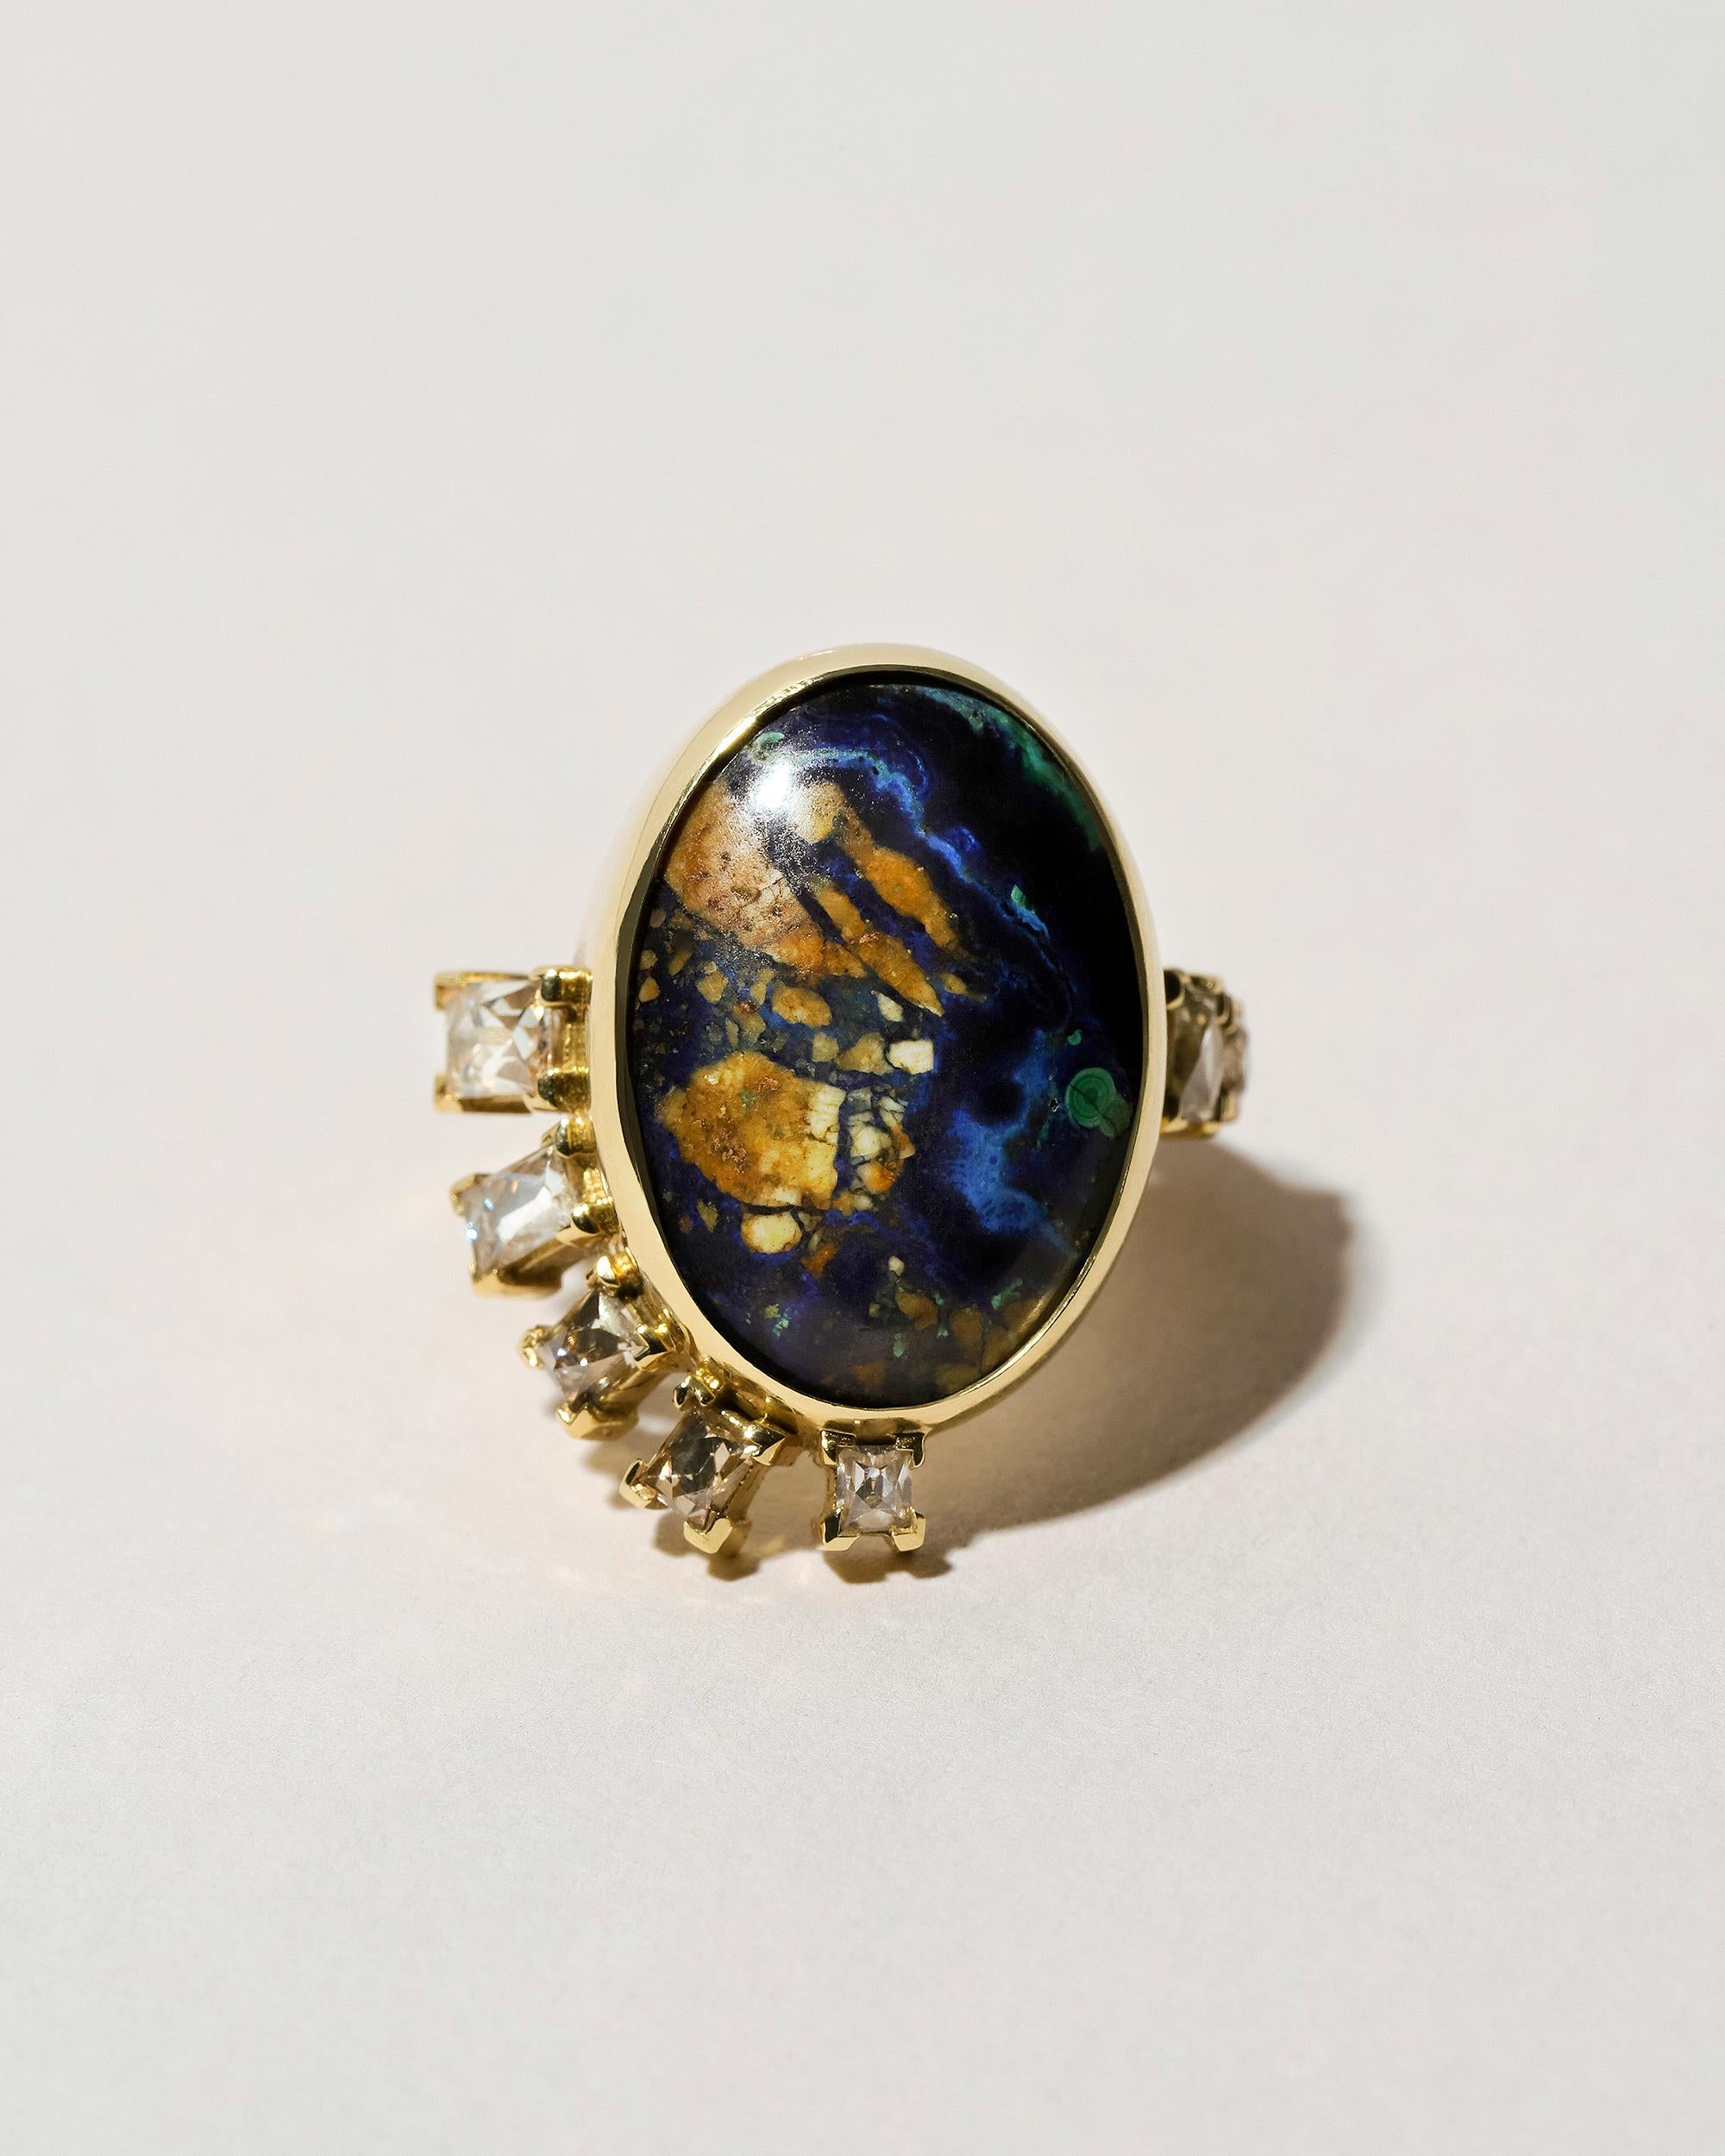 One-of-a-kind cluster ring

Oval cut, azurite malachite cabochon weighs 9.57 ct. and measures 19.85mm by 13.90mm

Three French cut, white diamonds have a total gem weight of 0.59 ct.

Two French cut, champagne diamonds have a total gem weight of